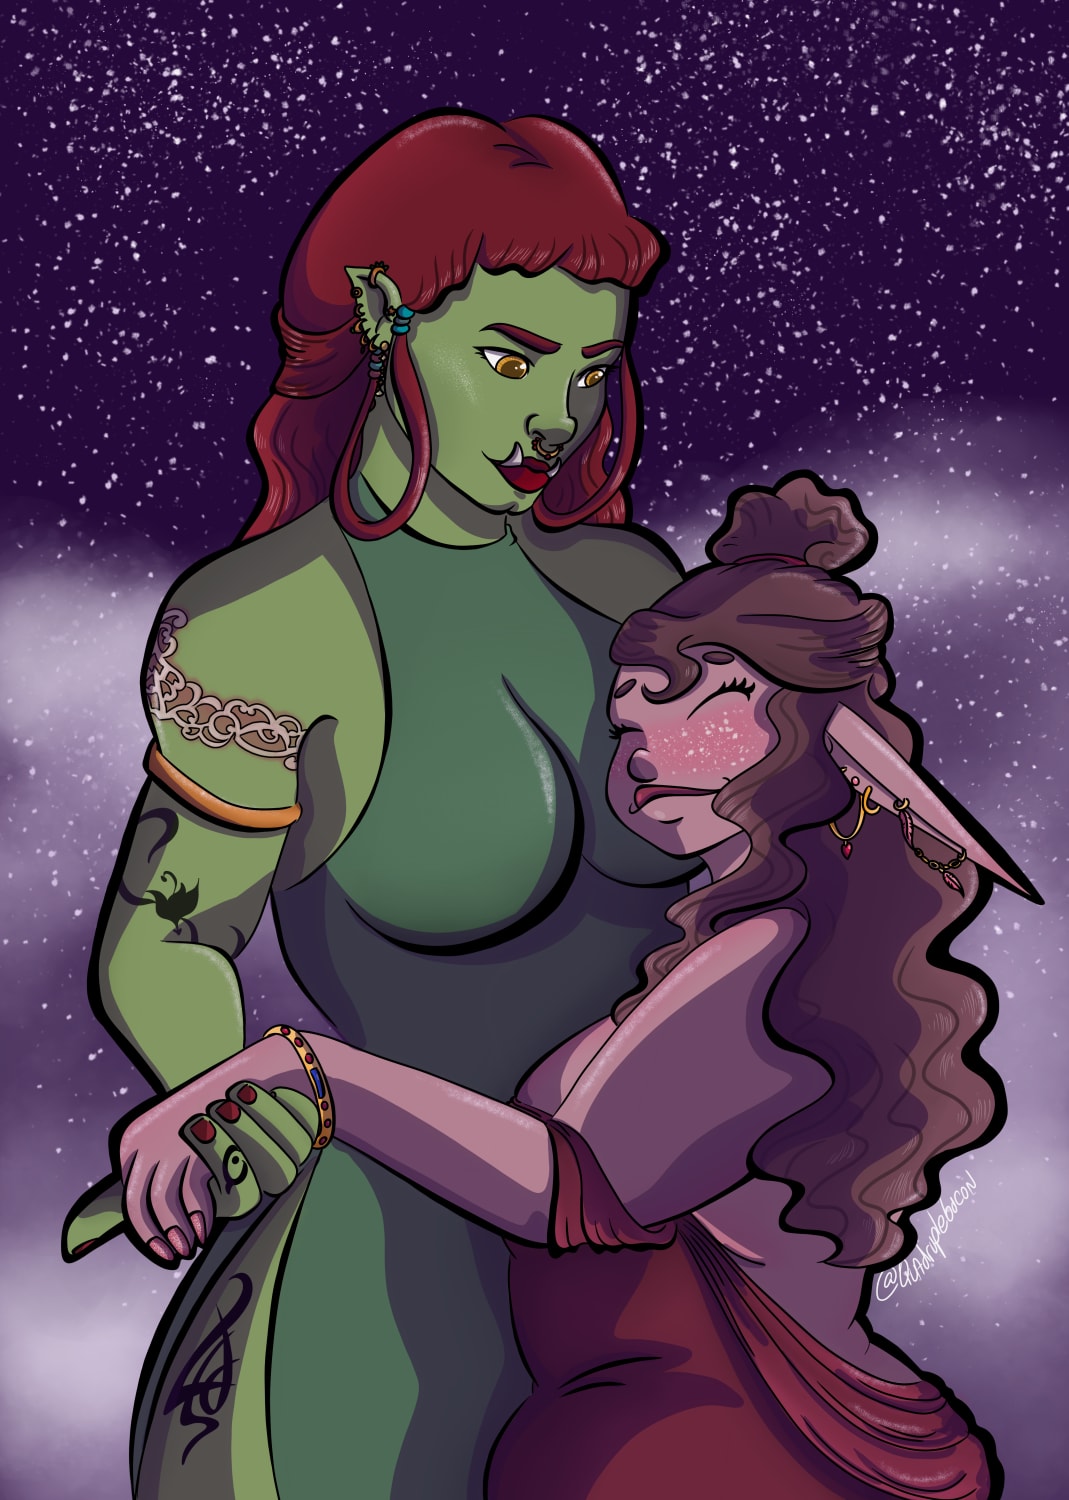 Elven girls and their girlfriends seem to be my comfort zone for art (art)